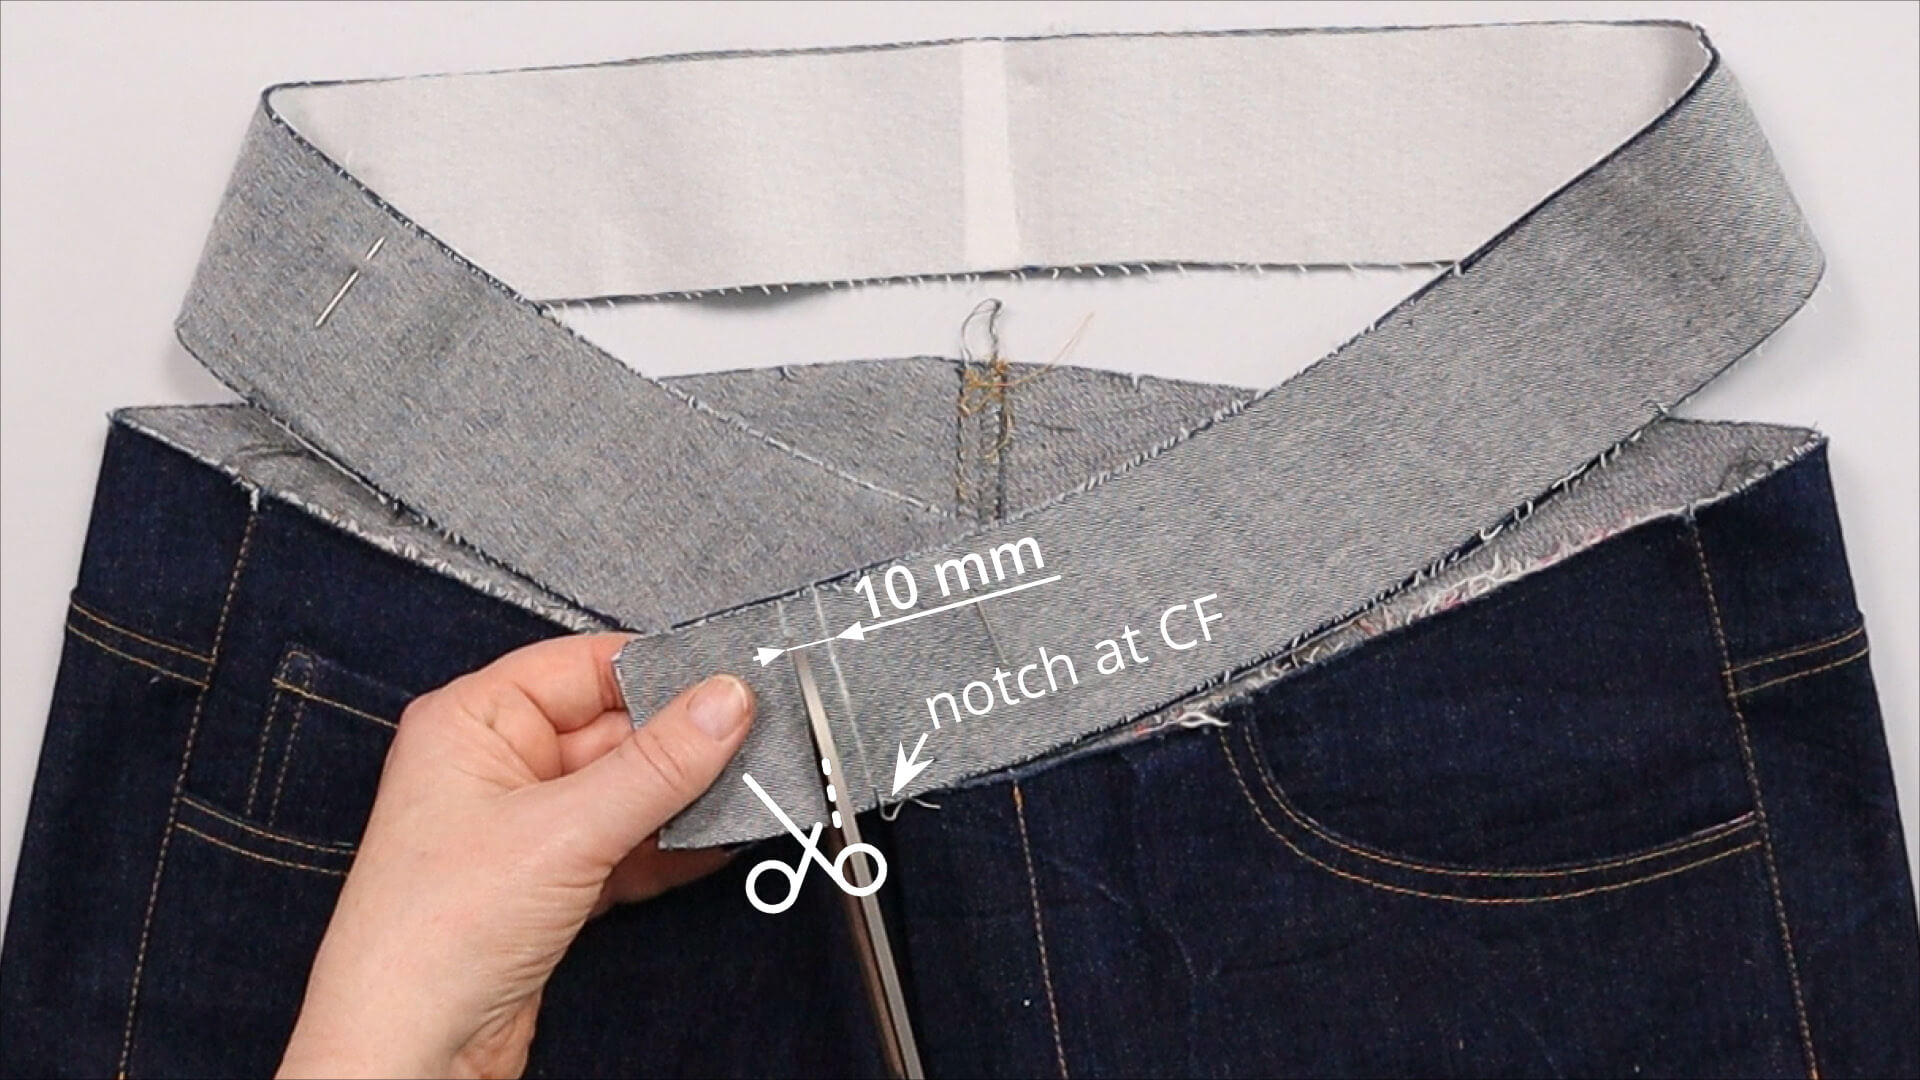 smartPATTERN sewing instructions Sew attached waistband on denim trousers - marking the seam width on the left side of the waistband